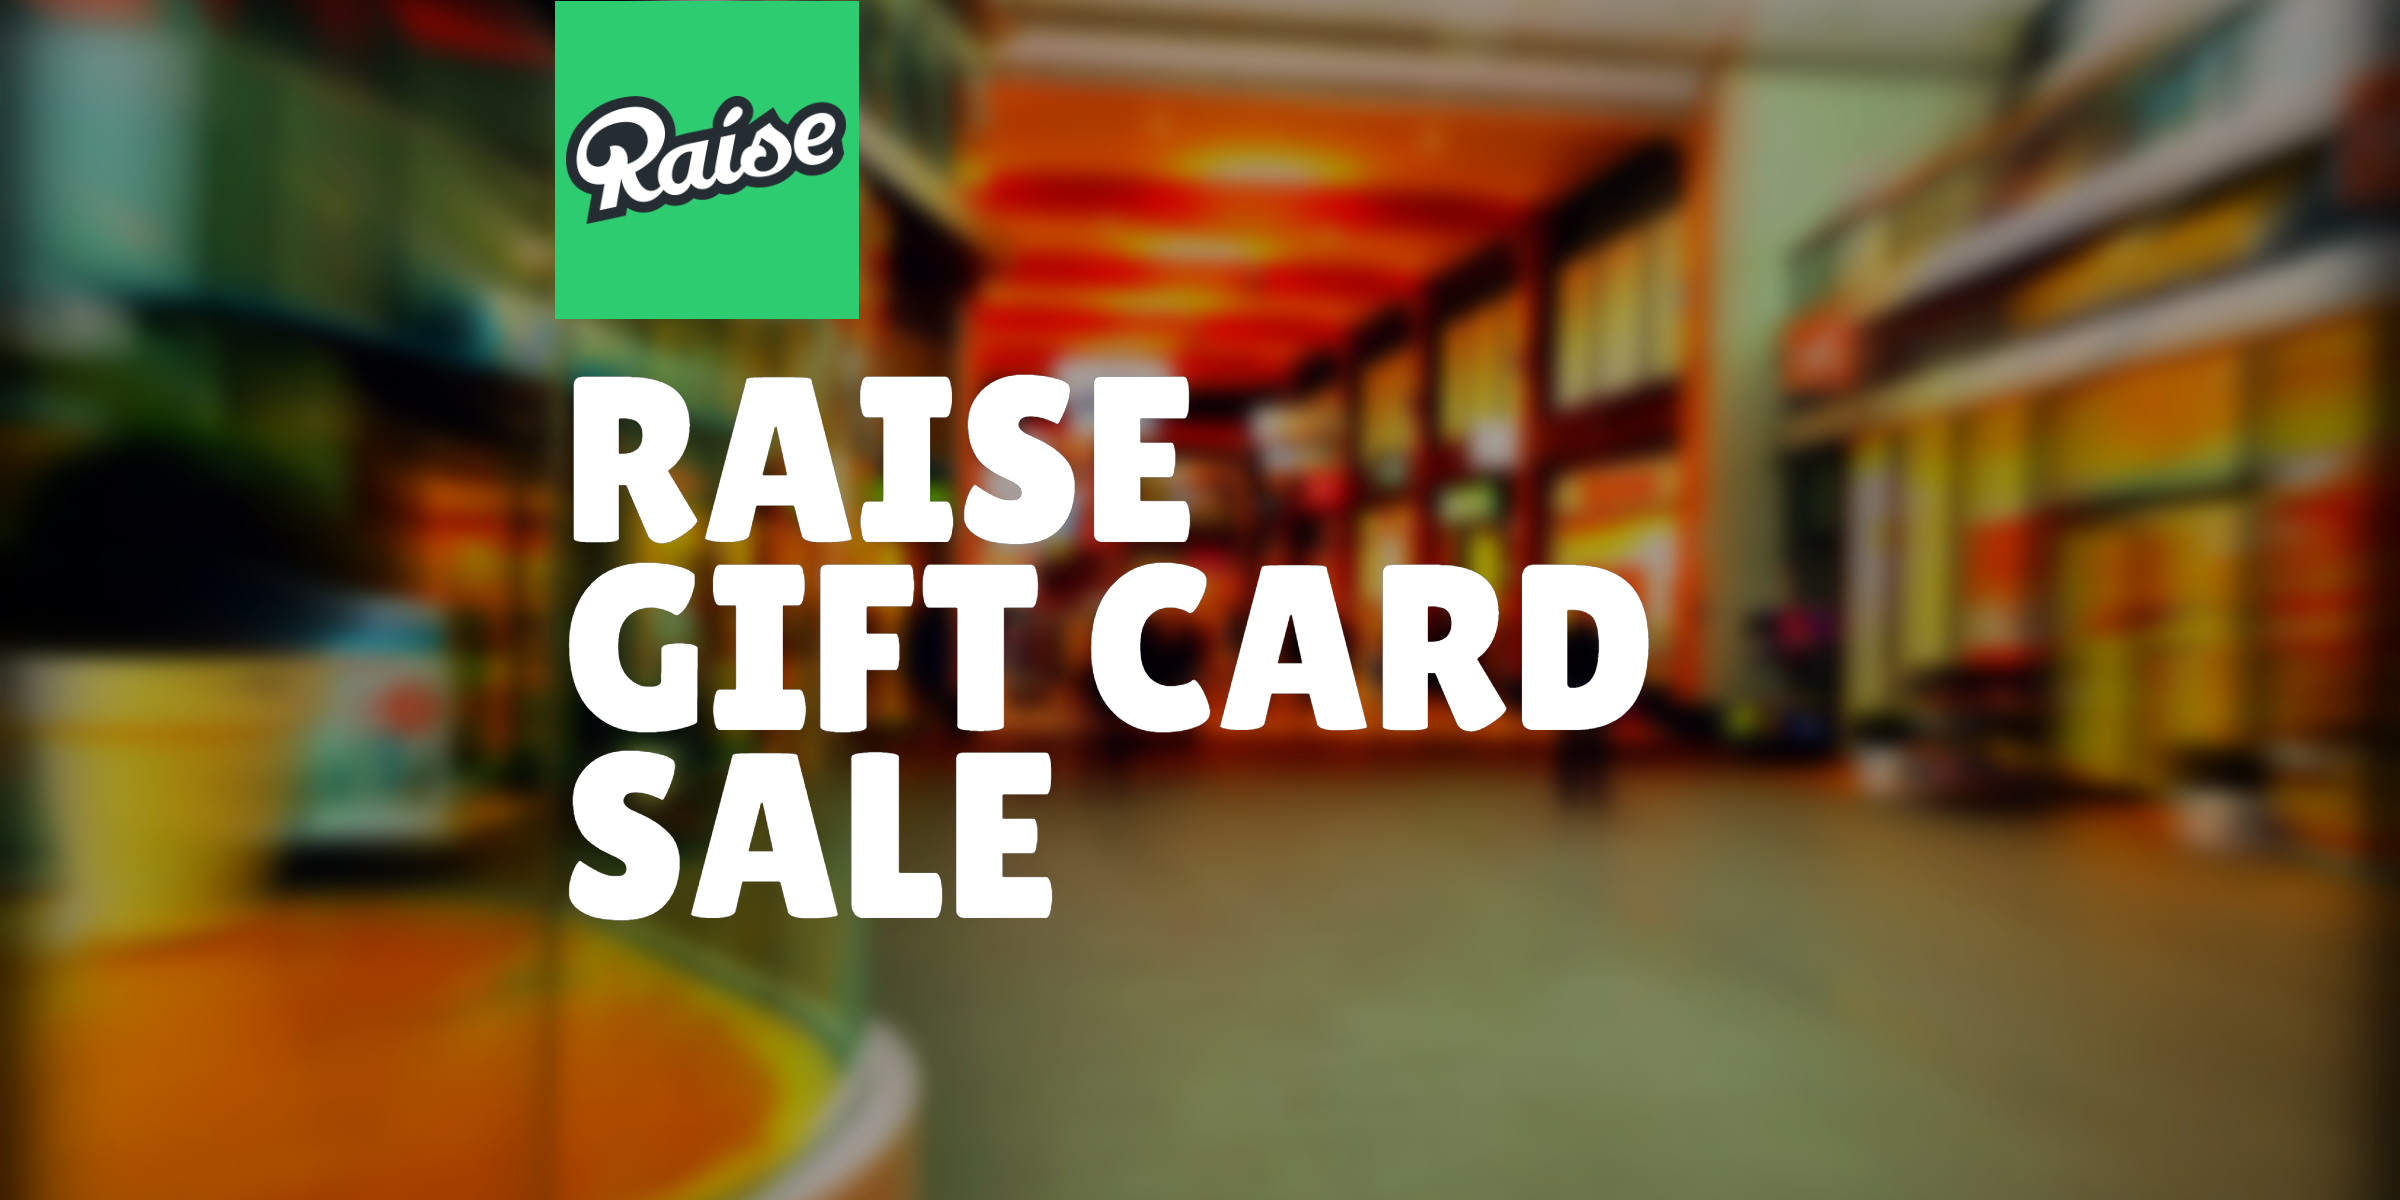 raise-site-wide-sale-5-off-all-gift-cards-this-weekend-miles-to-memories